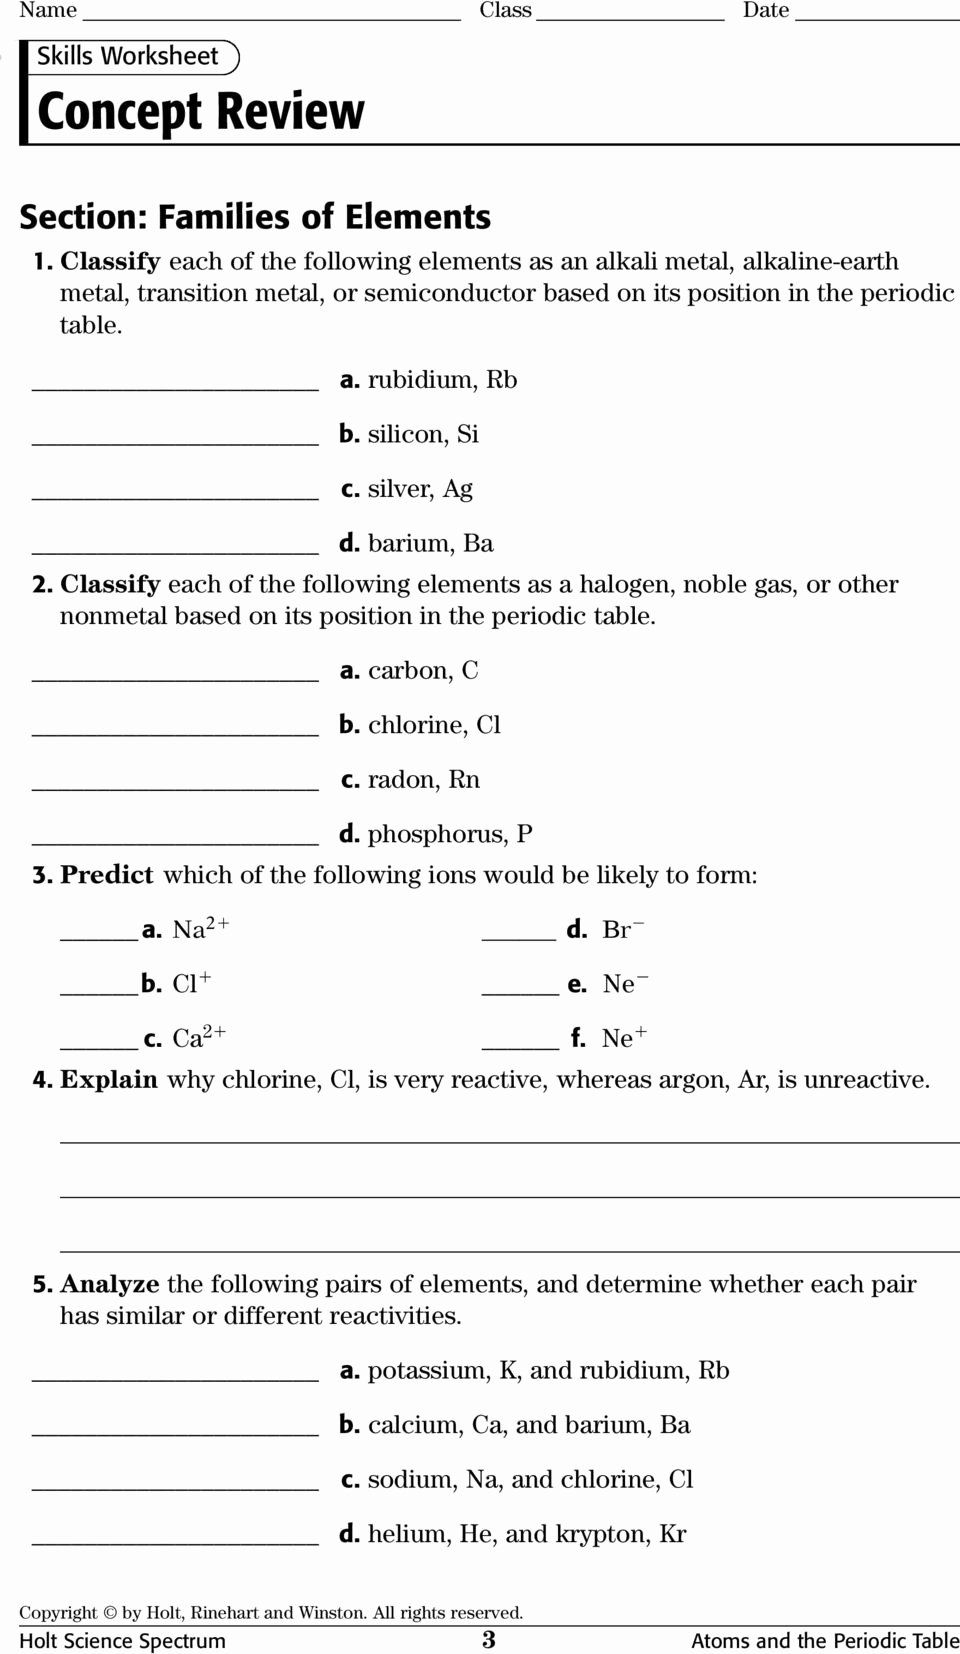 Physical Science Fission Fusion Worksheet Classwork Answer Key